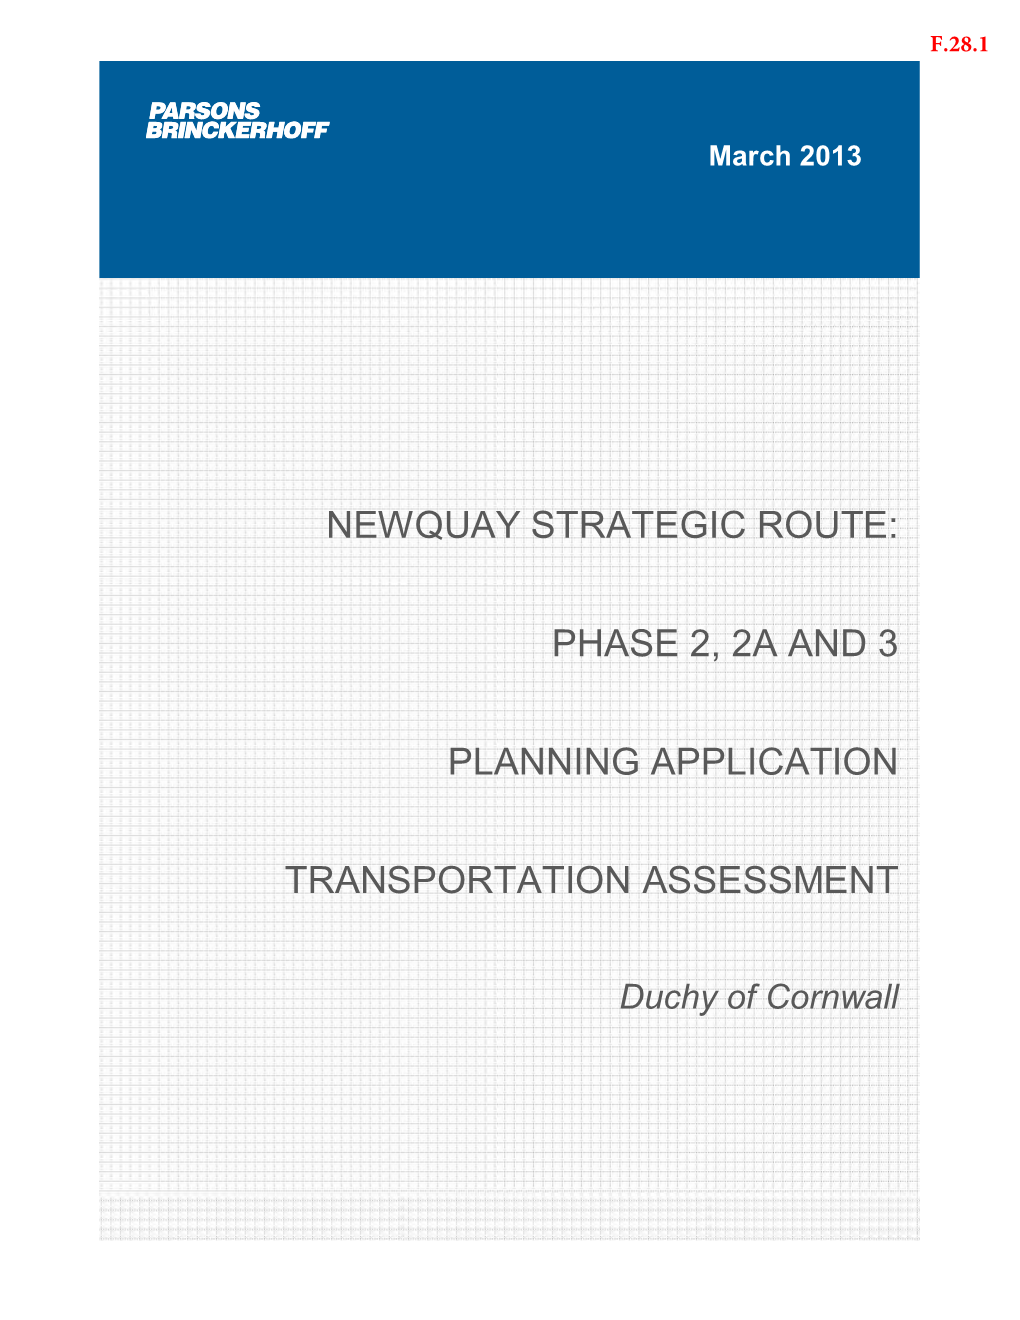 Newquay Strategic Route: Phase 2, 2A and 3 Planning Application Transportation Assessment